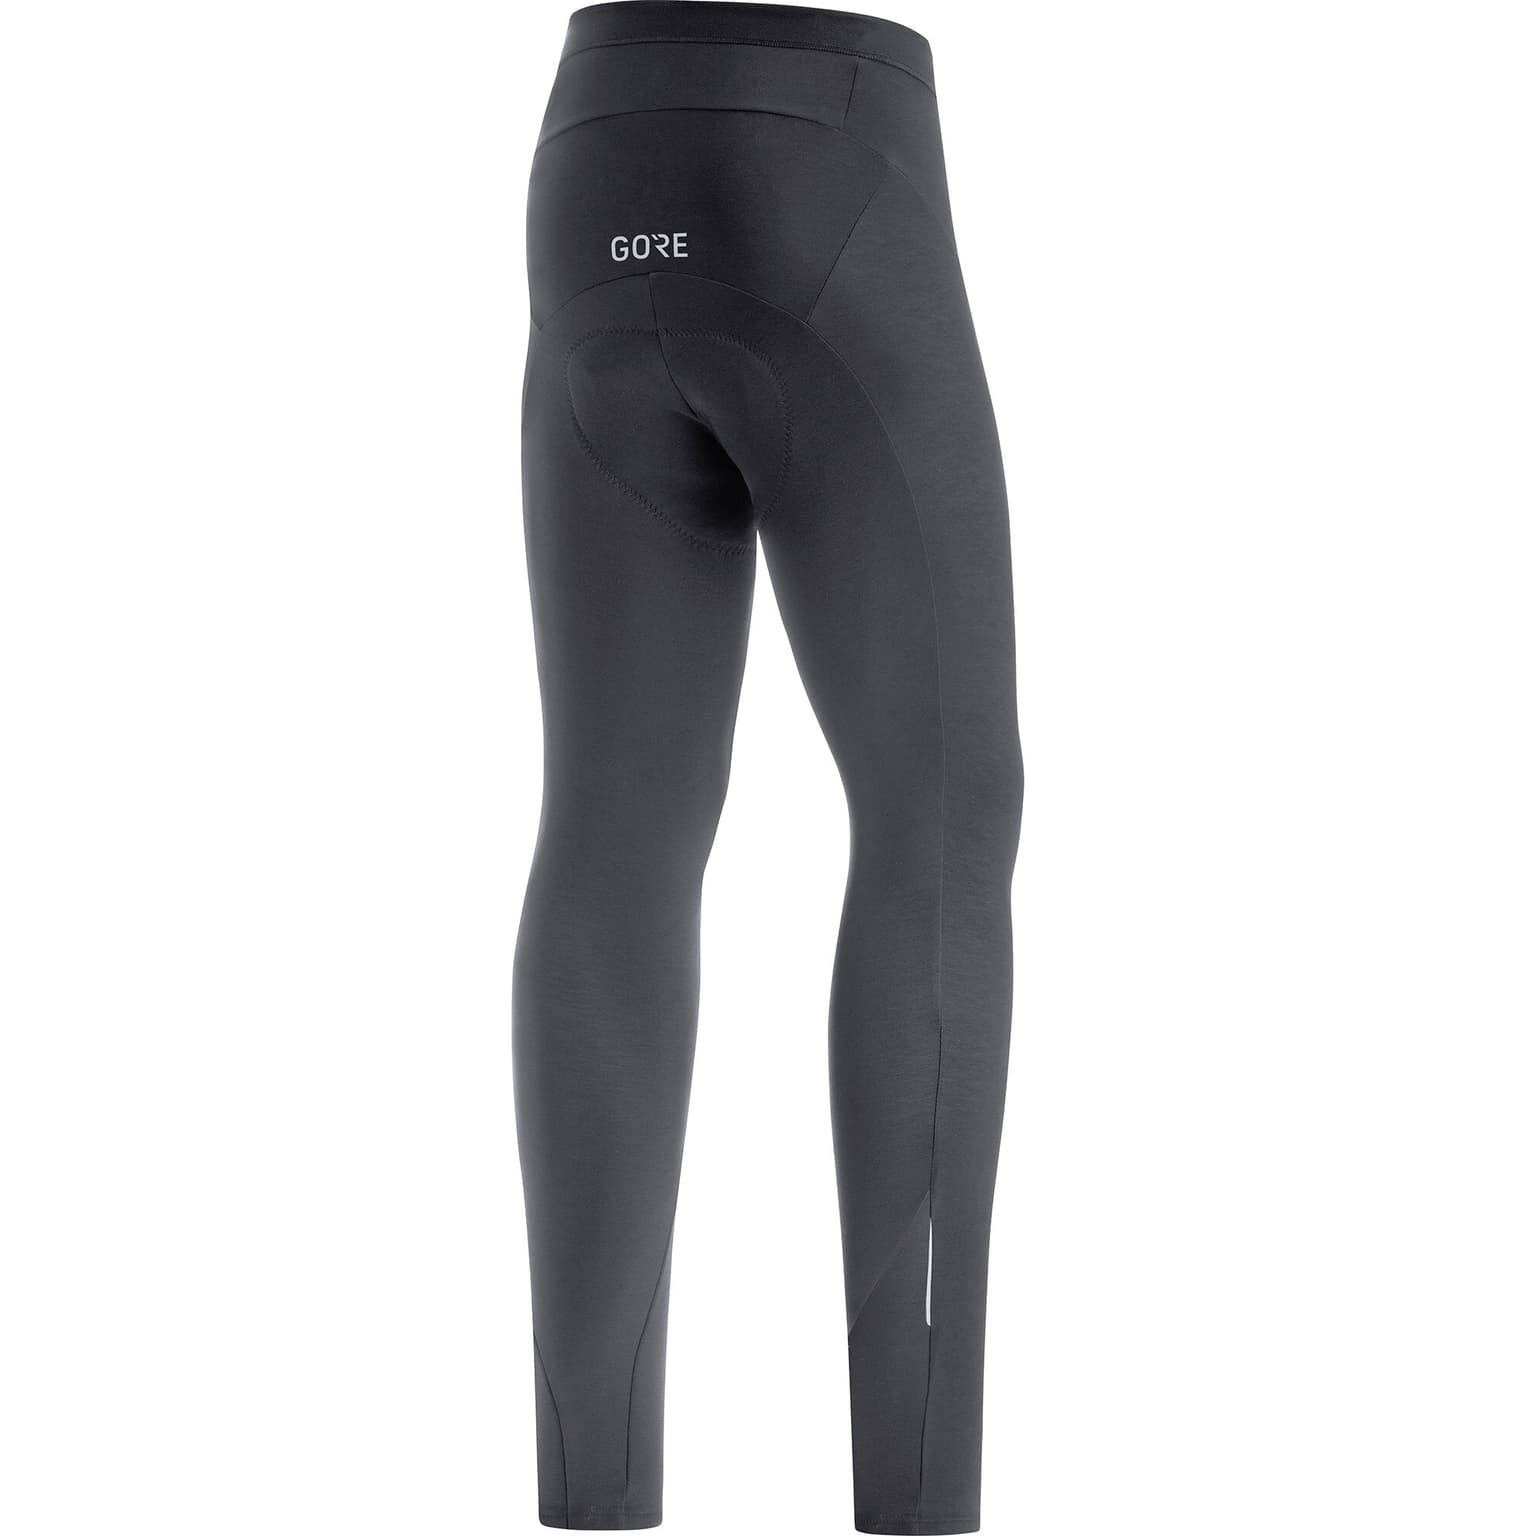 Gore Gore C3 Thermo Tights+ Tights noir 2